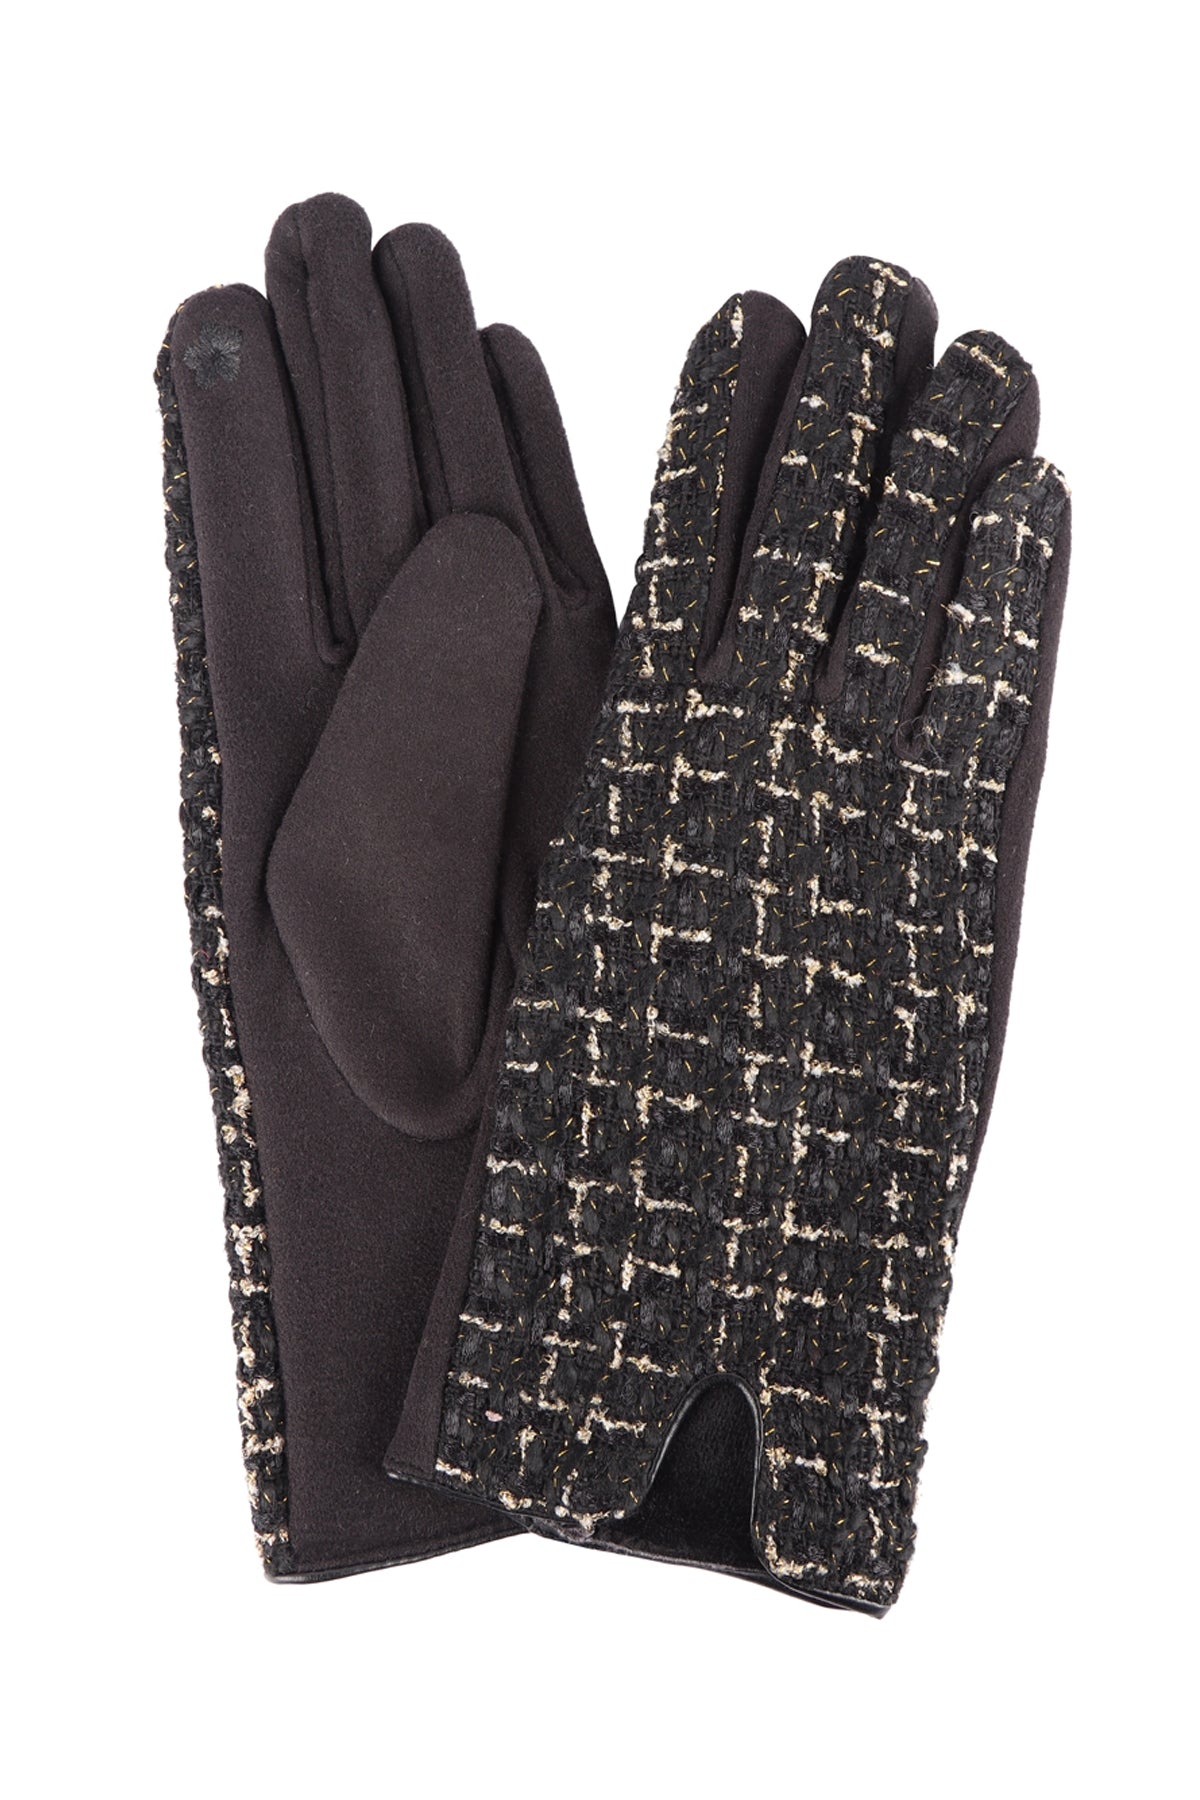 PLAID SMART TOUCH GLOVES/6PCS (NOW $2.75 ONLY!)